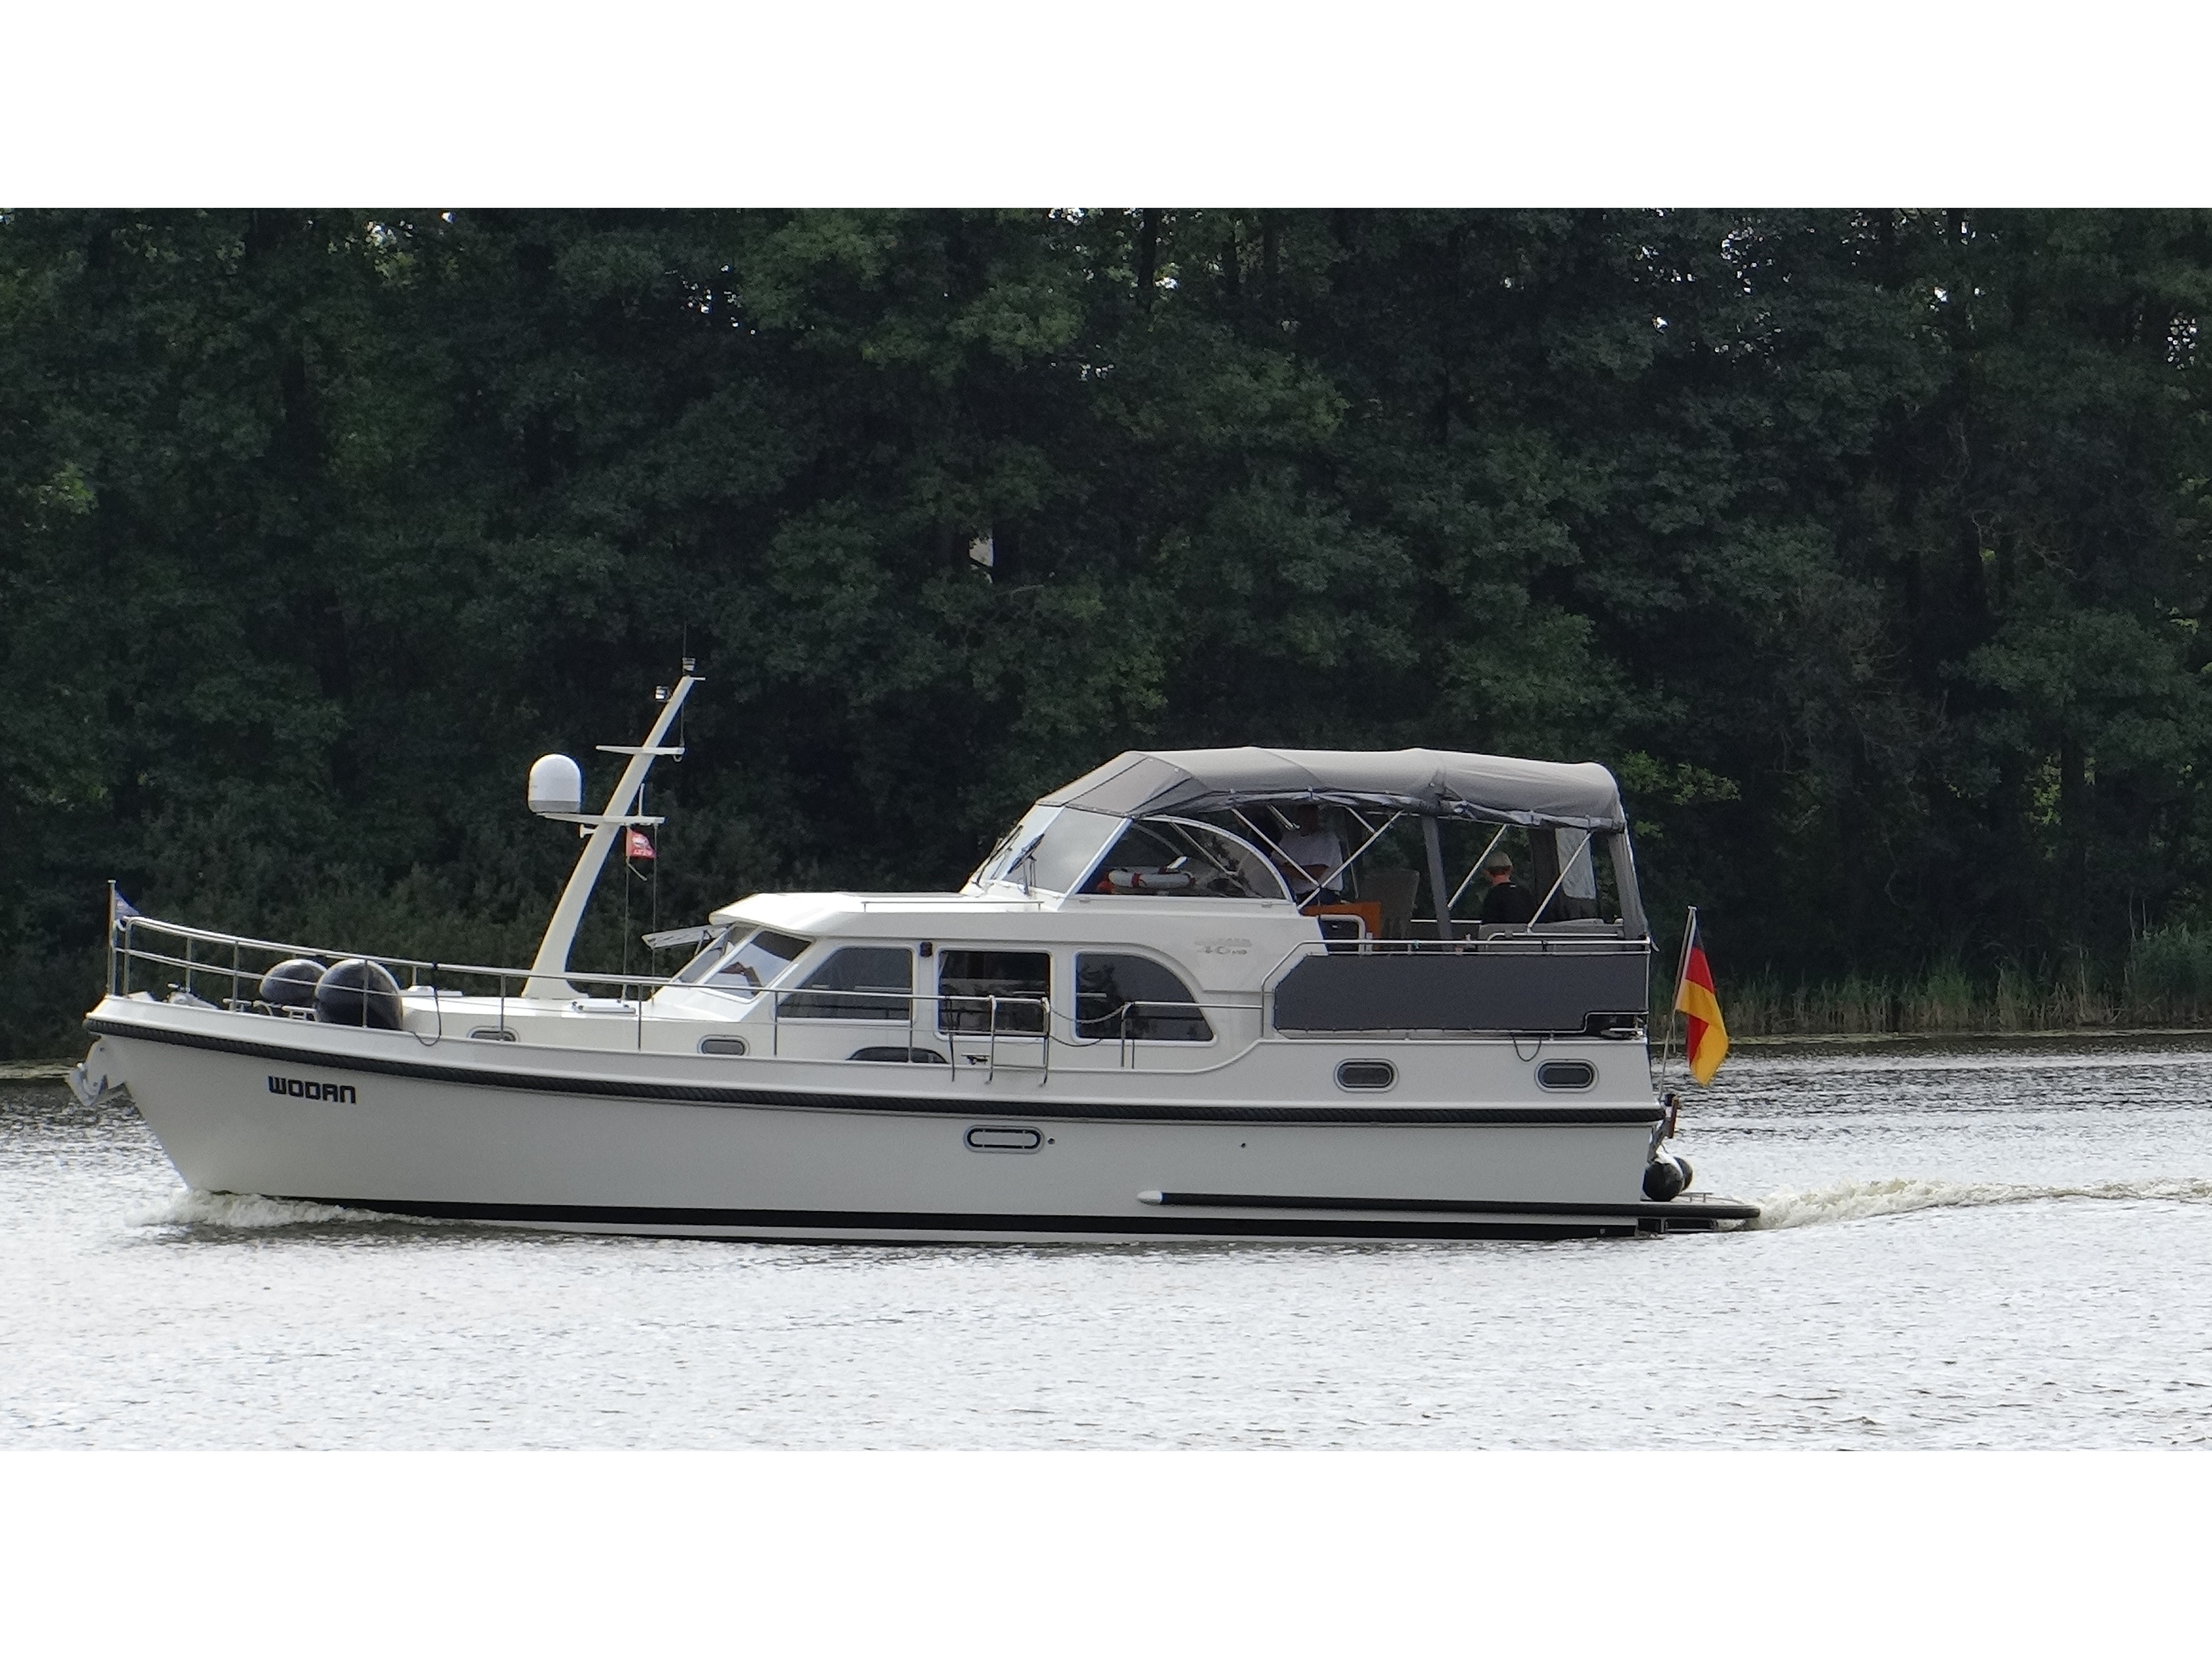 Linssen Grand Sturdy 40.9 AC - Yacht Charter Germany & Boat hire in Germany Mirow Jachthafen Mirow 2